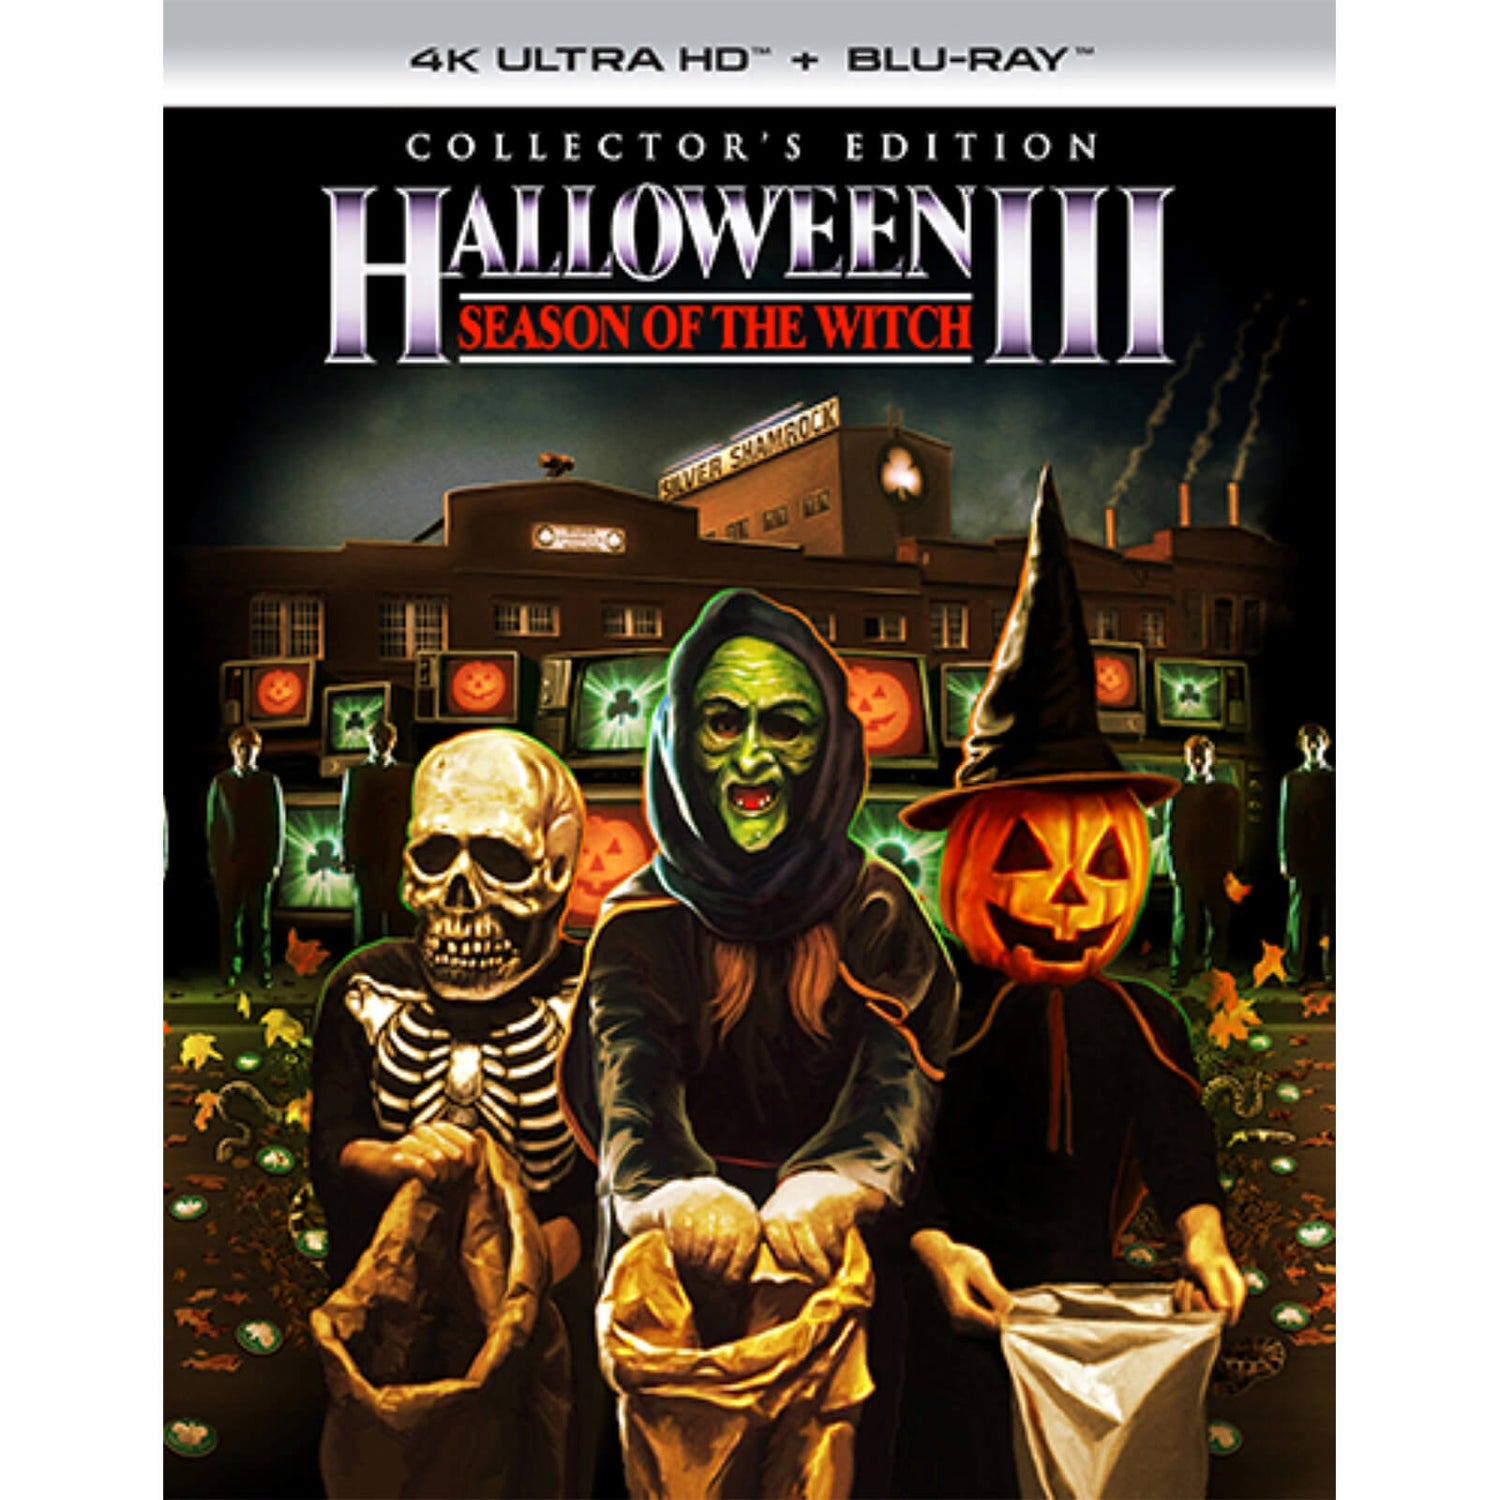 Halloween III: Season On The Witch: Collector's Edition - 4K Ultra HD (Includes Blu-ray)